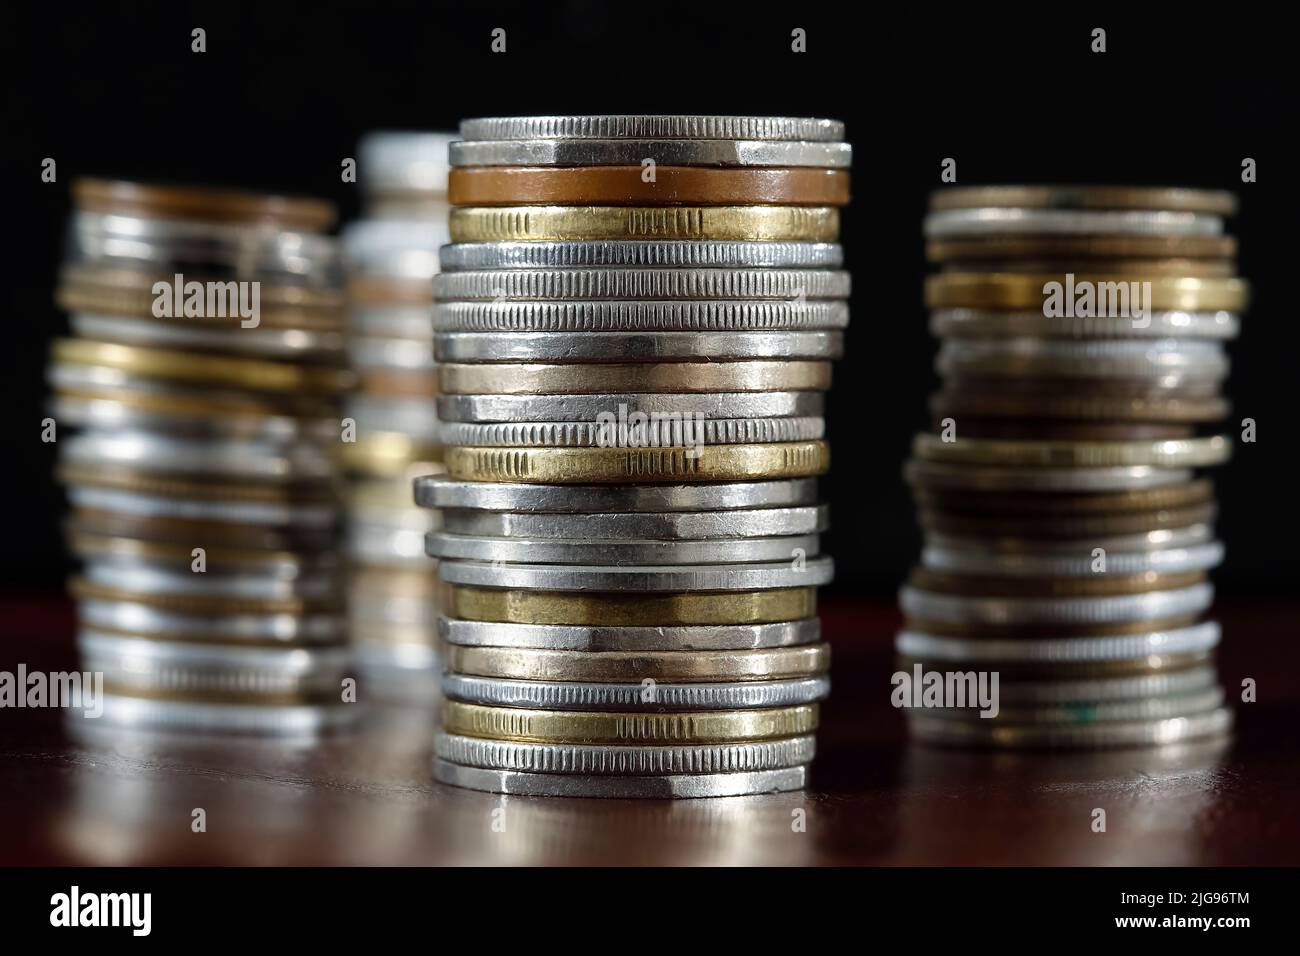 The image of money, in this case coins, represents savings Stock Photo